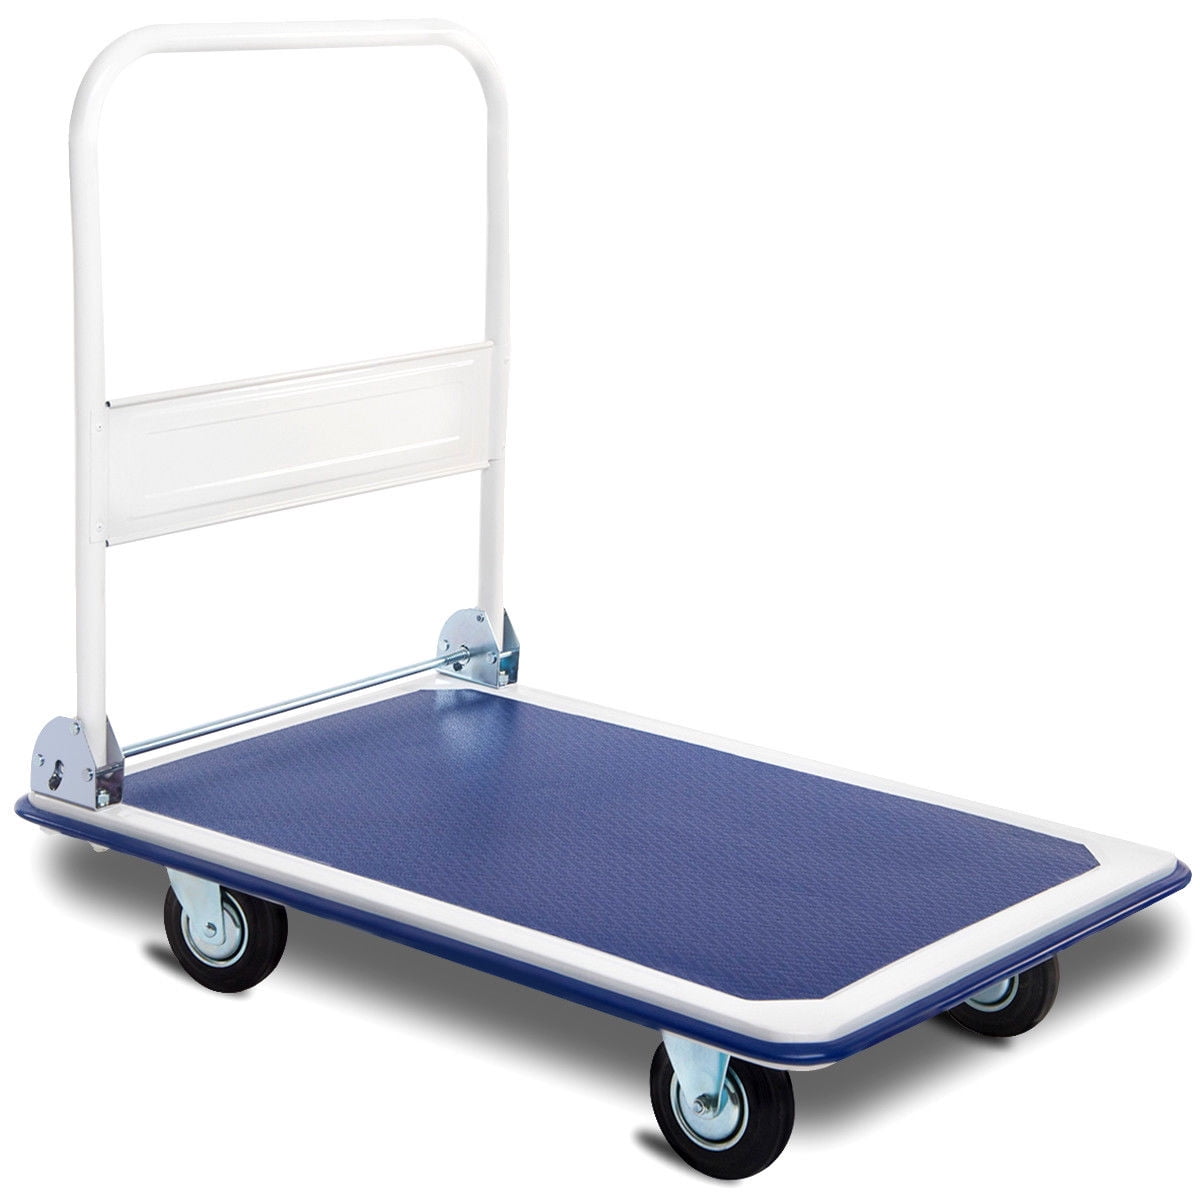 Details about   Lonabr 330/660 lbs Folding Platform Cart Dolly Push Hand Truck Moving Warehouse 